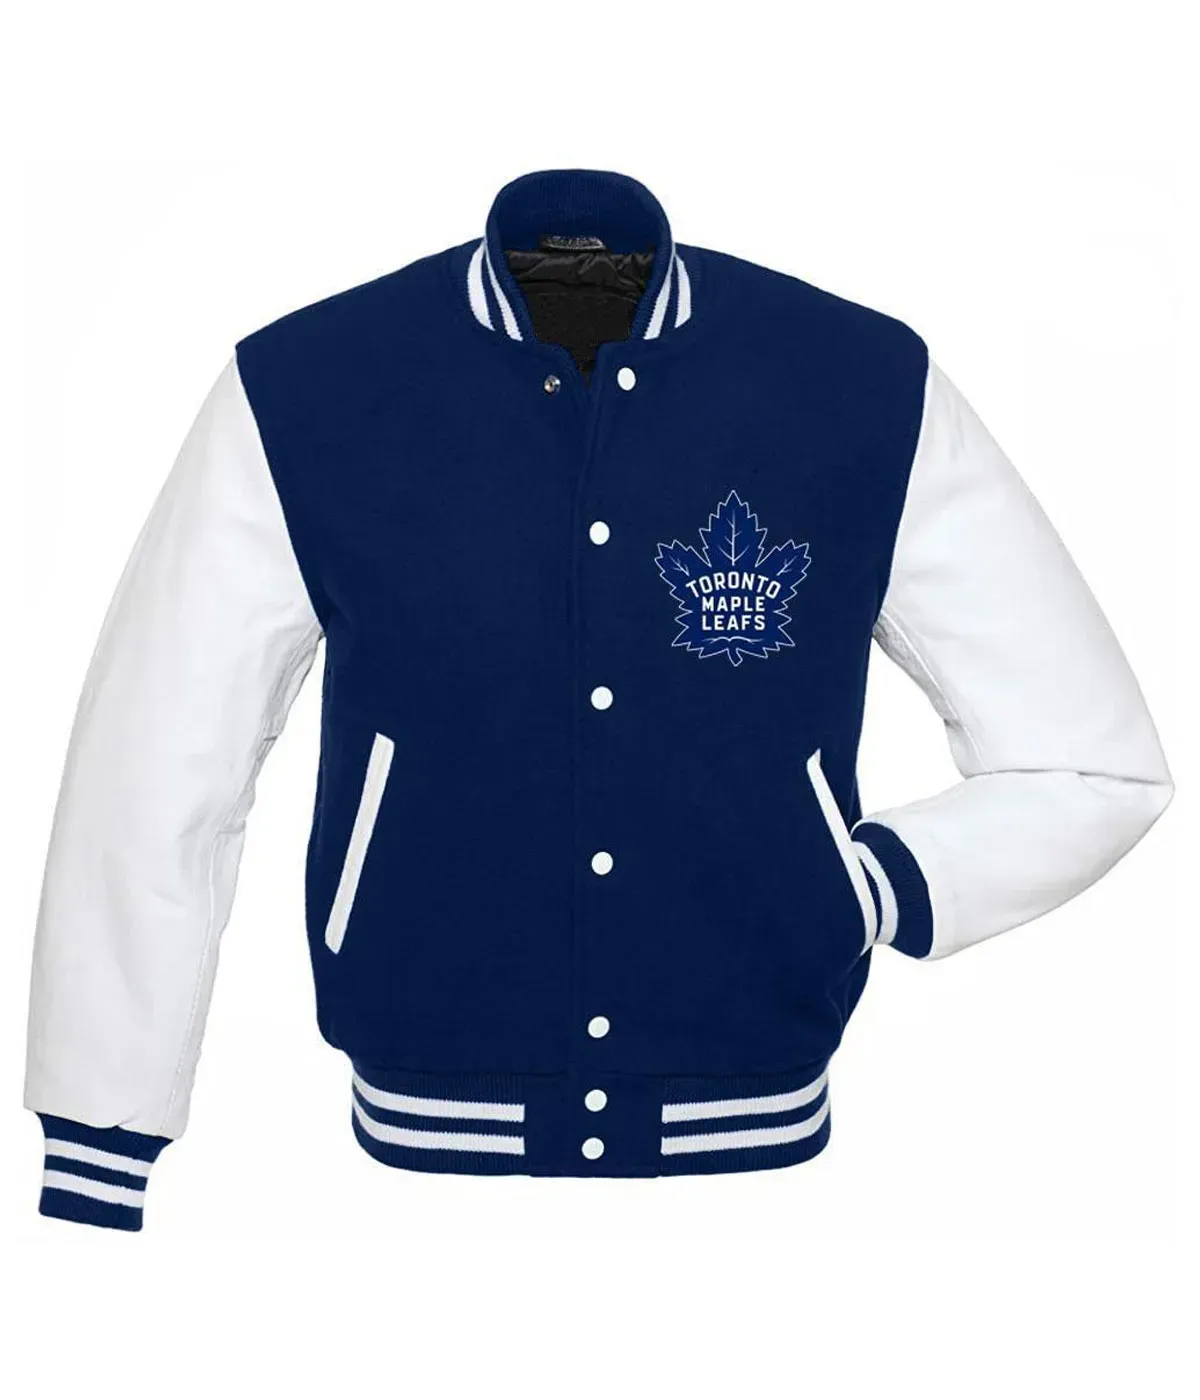 NHL Toronto Maple Leafs Blue and White Letterman Jacket